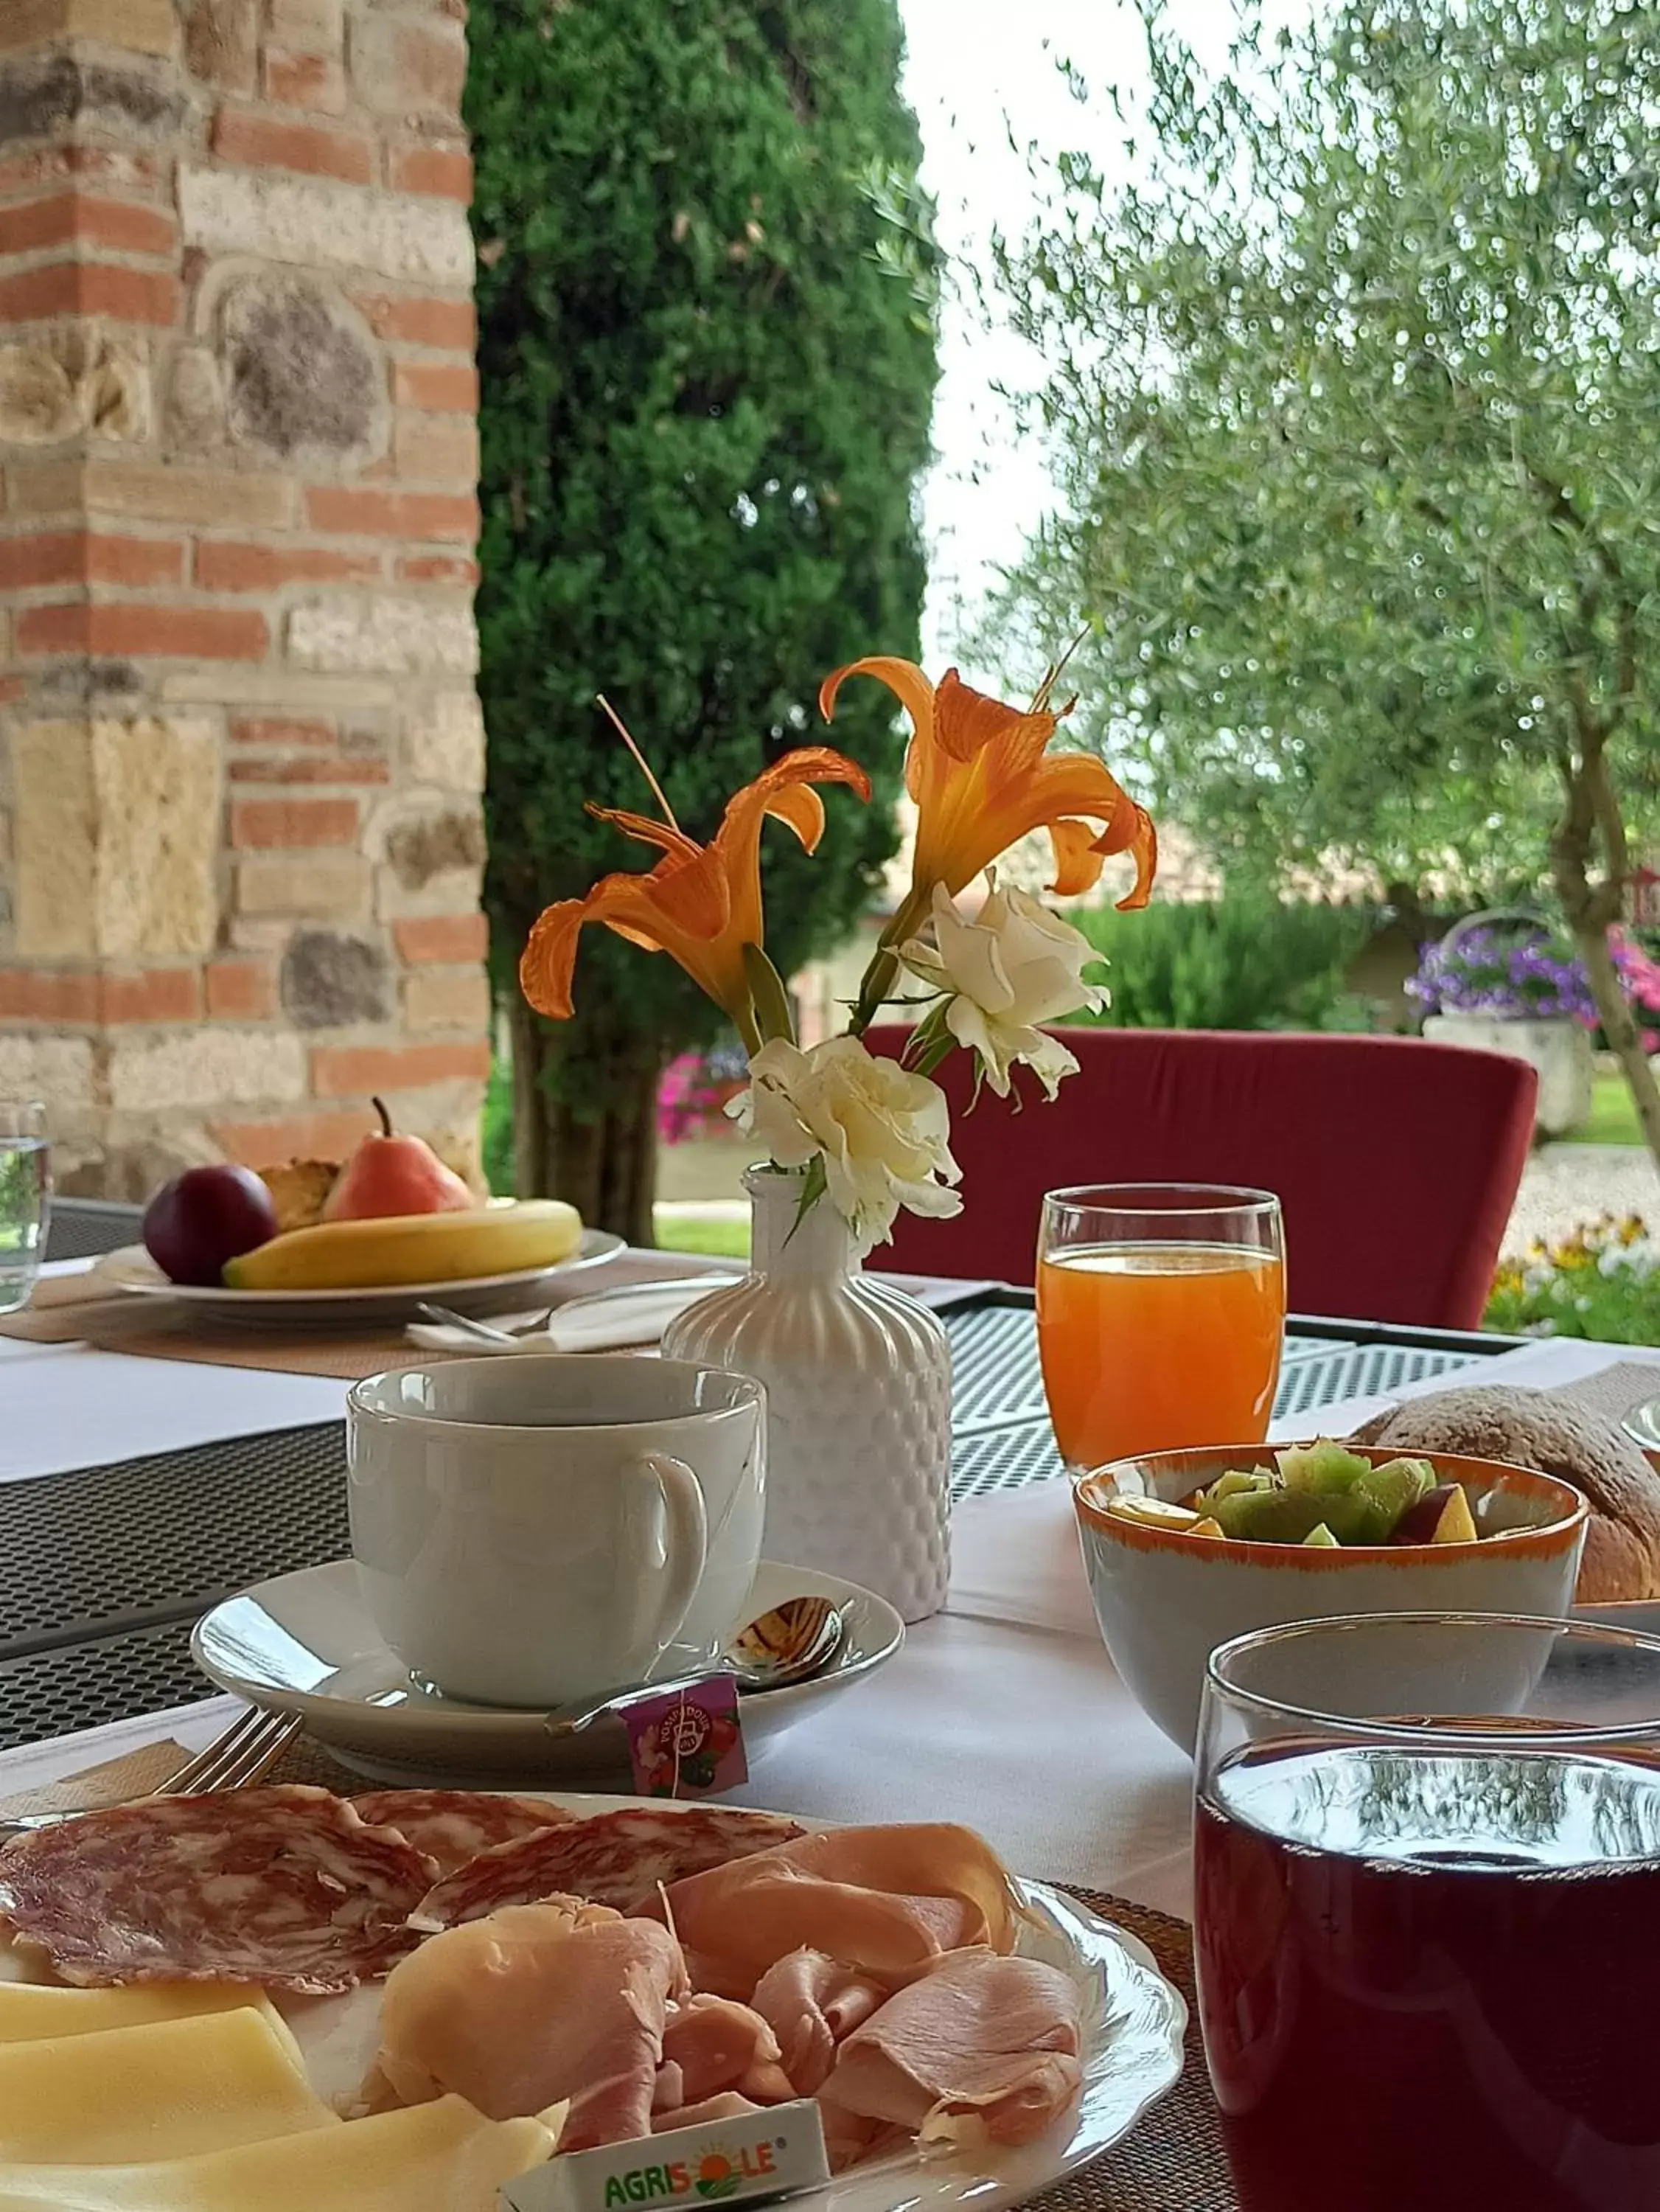 Area and facilities, Breakfast in Le Zampolle B & B